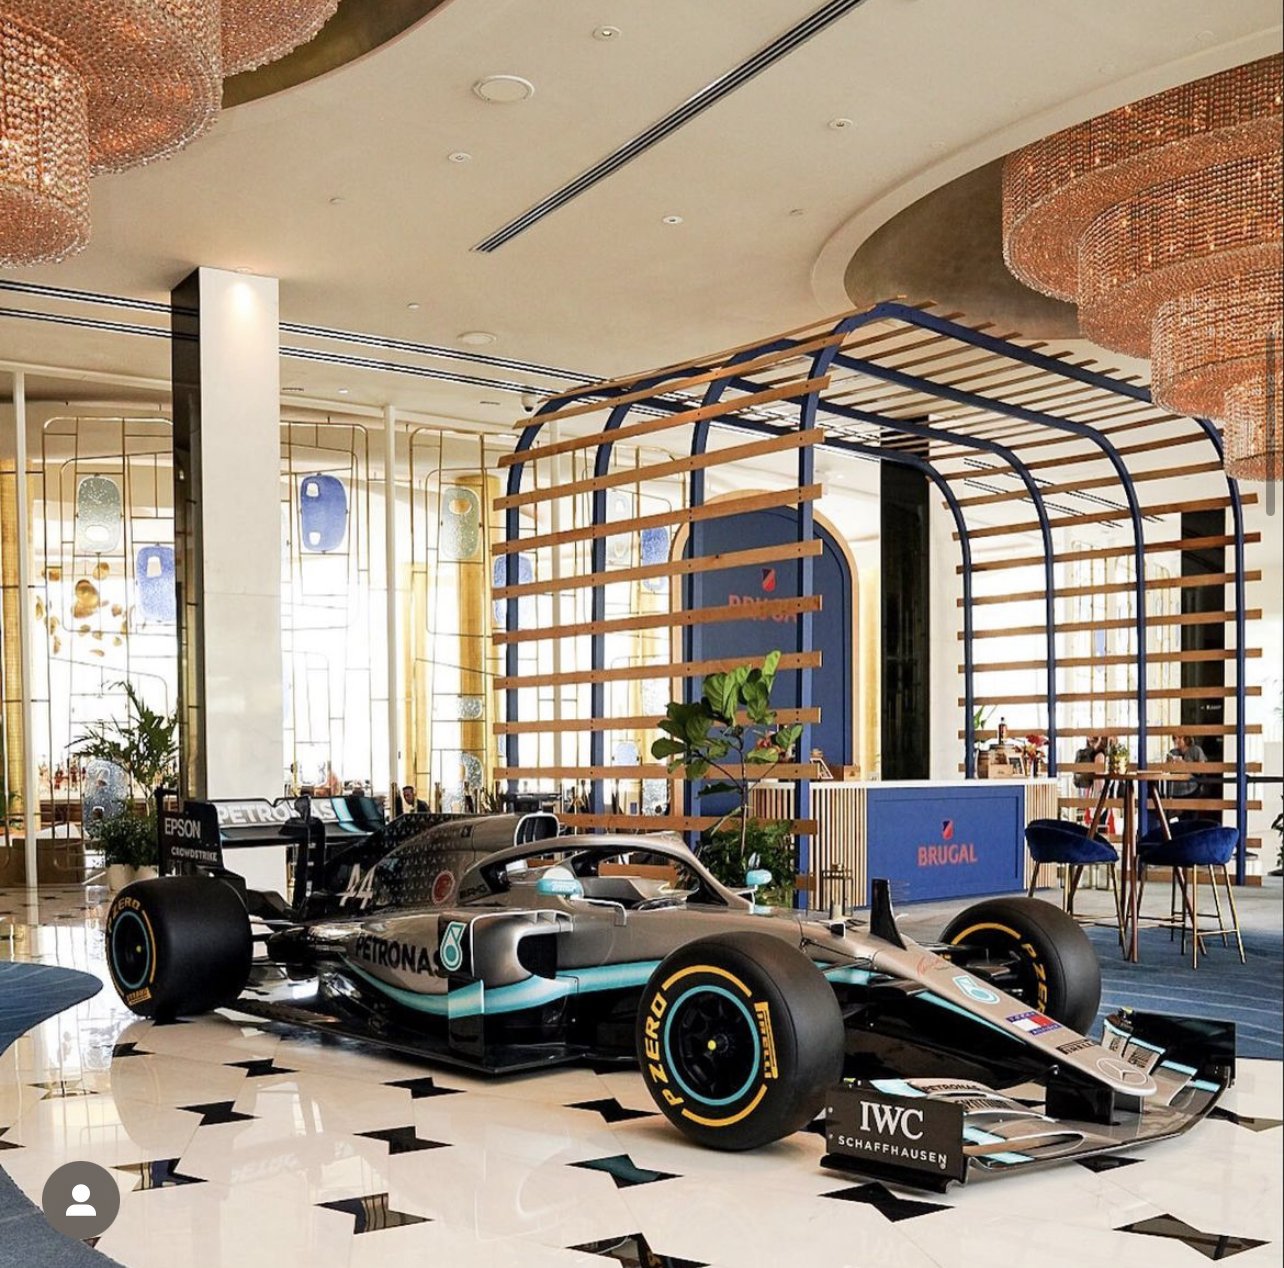 Rev Up Your Engines 5 Hotels to Experience the F1 Grand Prix in Miami — Hospitality Mentor